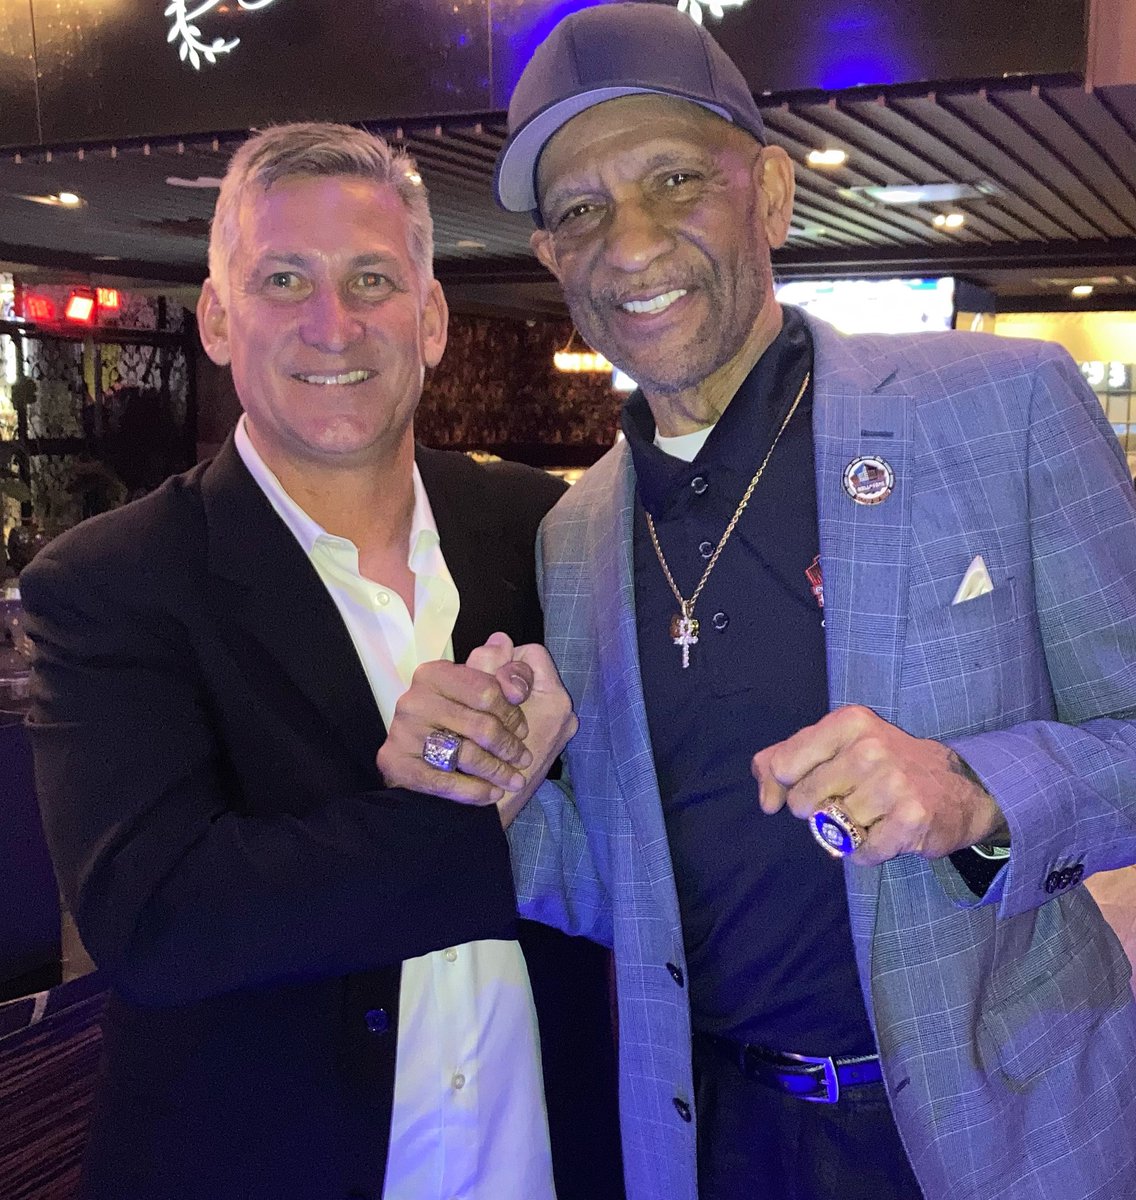 Good Times hangin’ with some of the Dallas Cowboy legends at the 1st annual Cowboys gathering party. Drew Pearson https://t.co/RfNFlc2edG